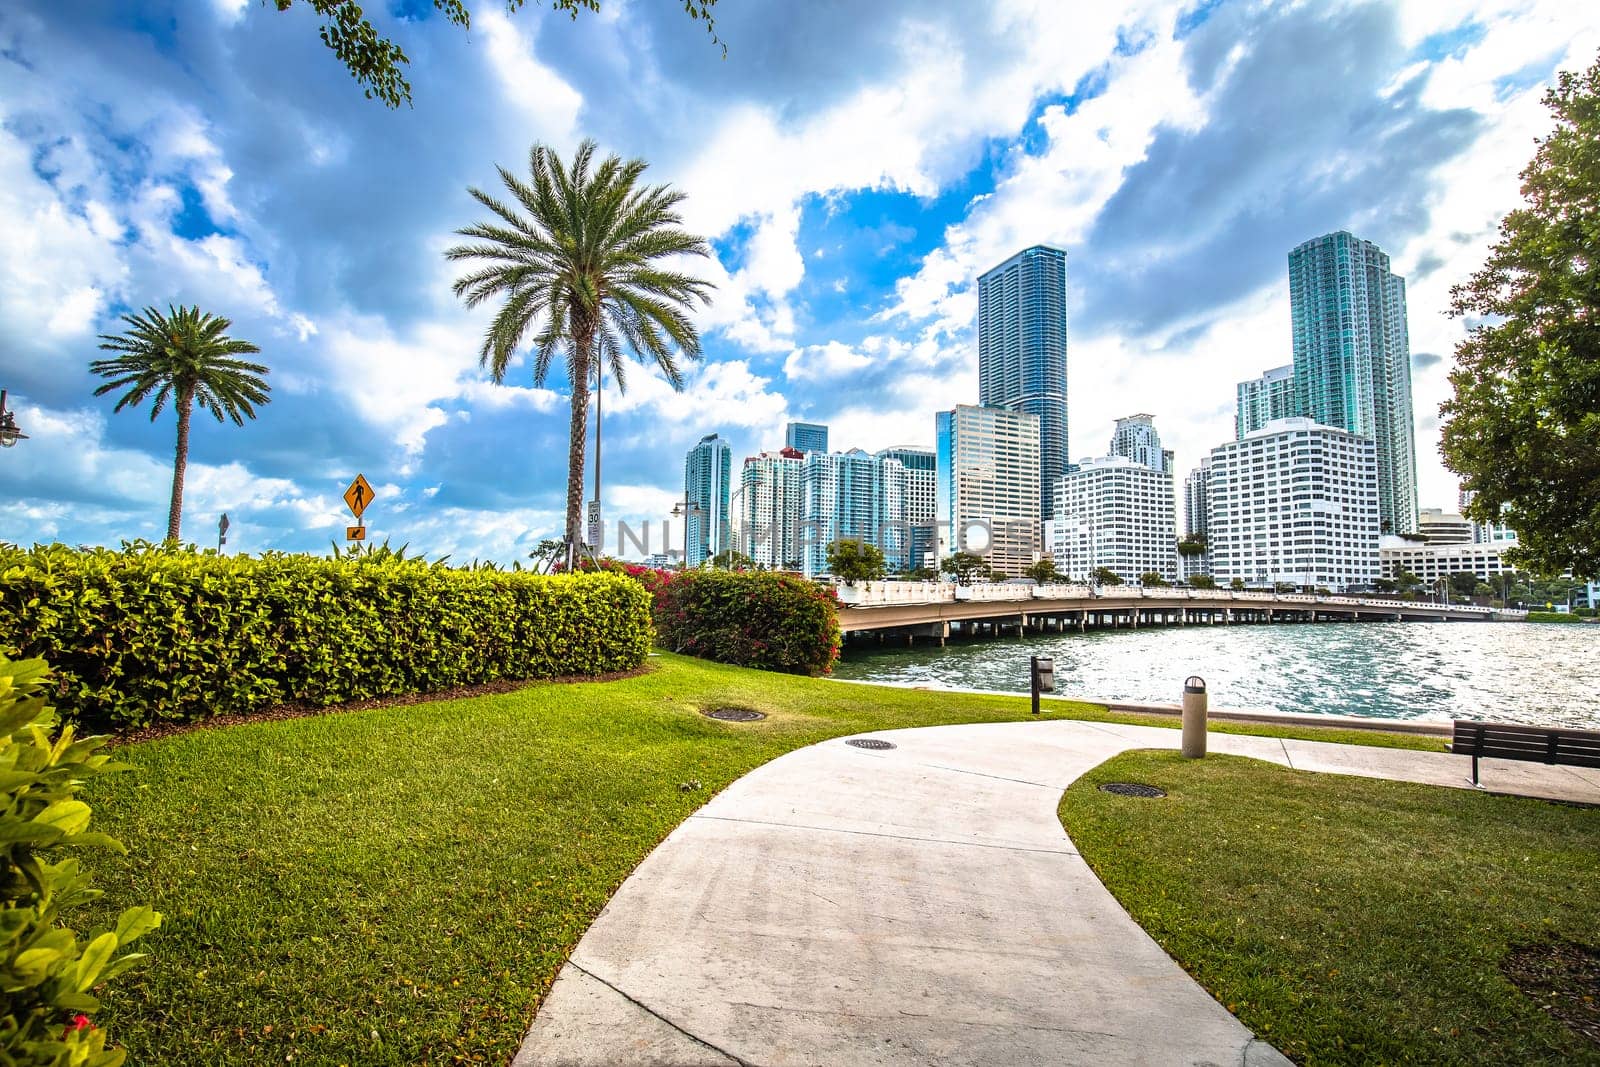 Miami skyline and waterfront view, Florida, United States of America